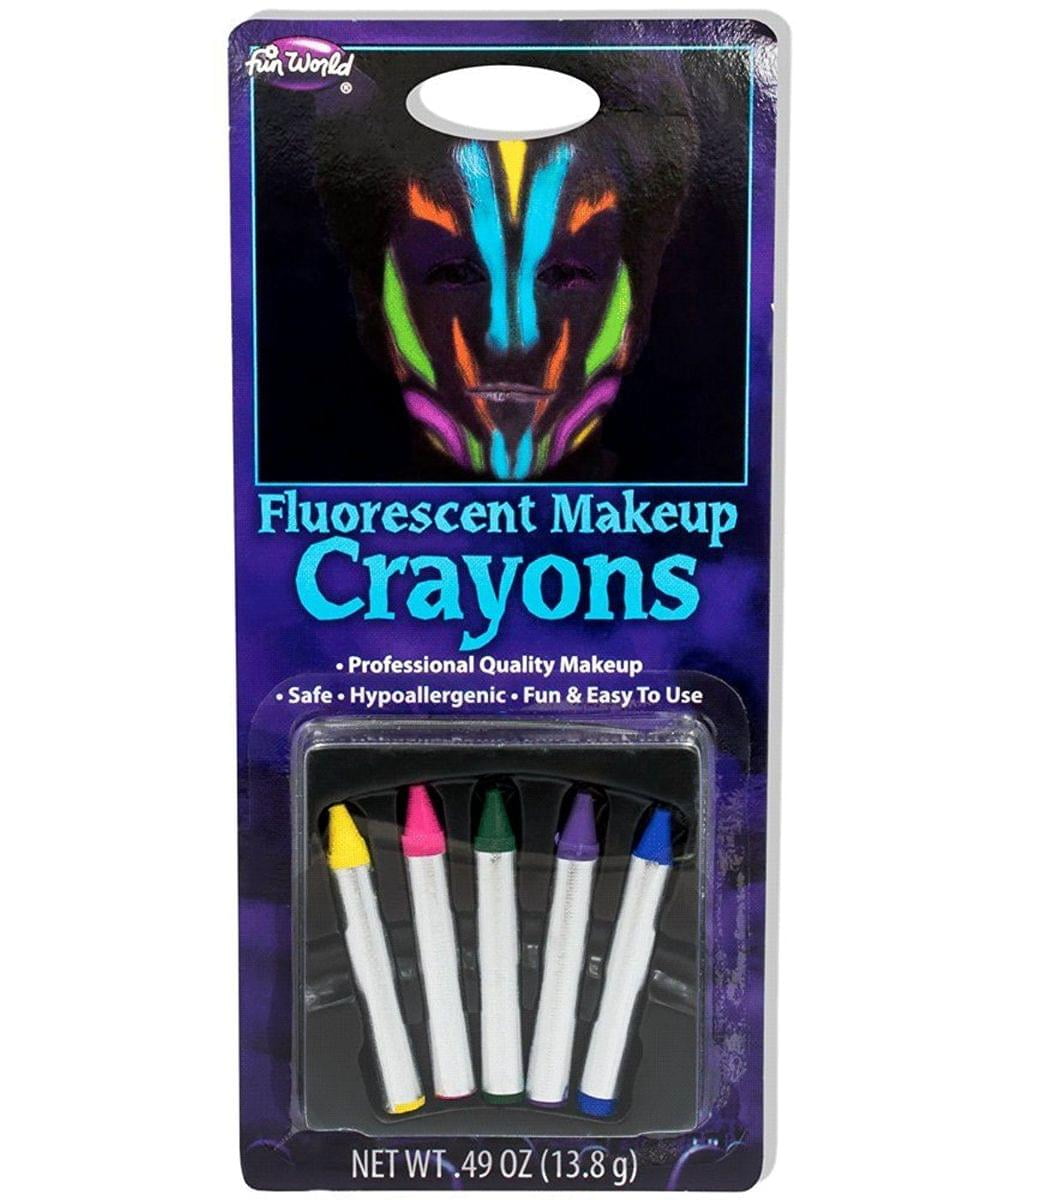 Crayon maquillage fluo 